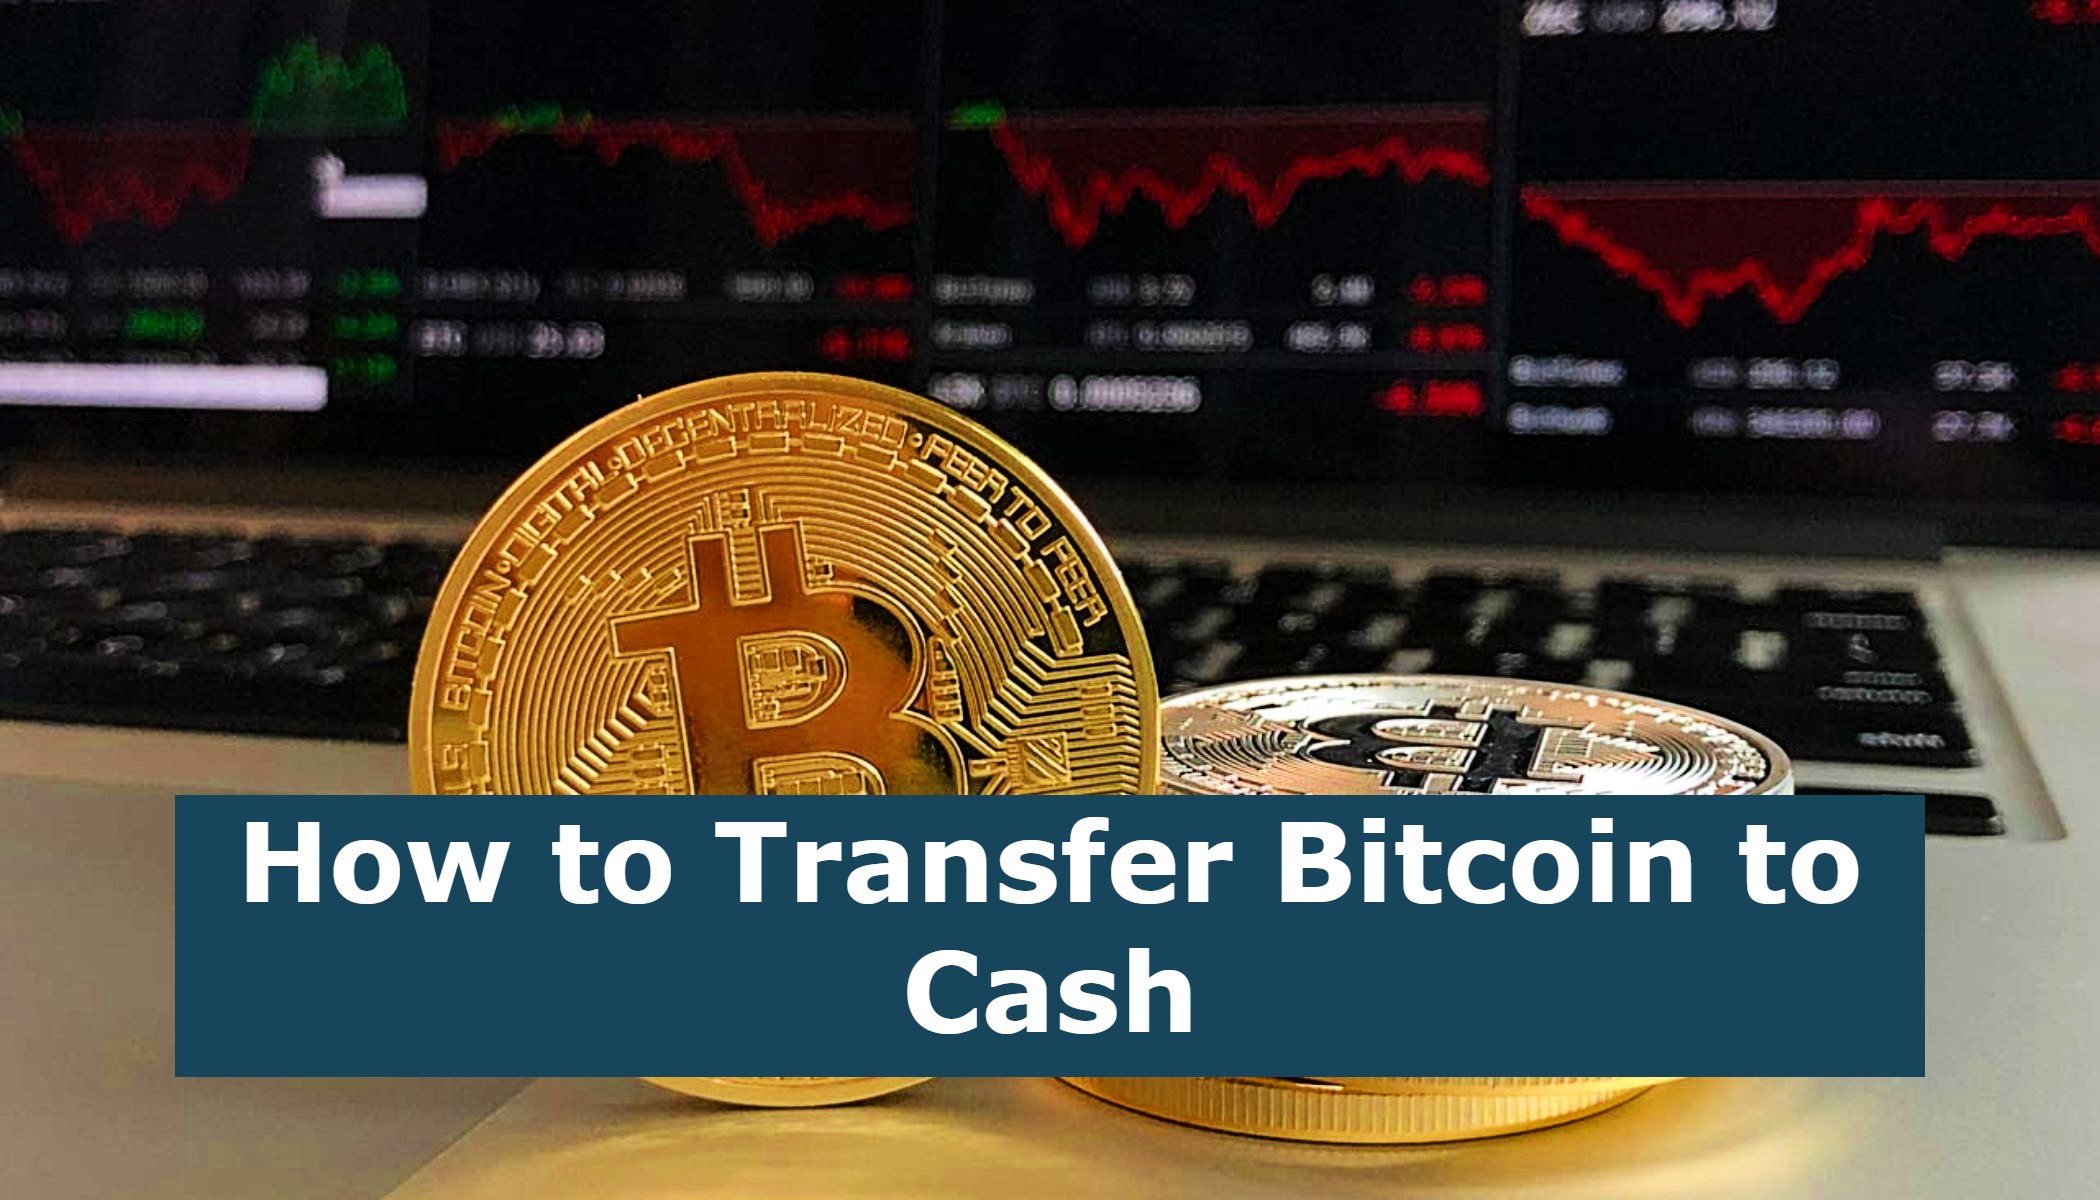 How to Transfer Bitcoin to Cash